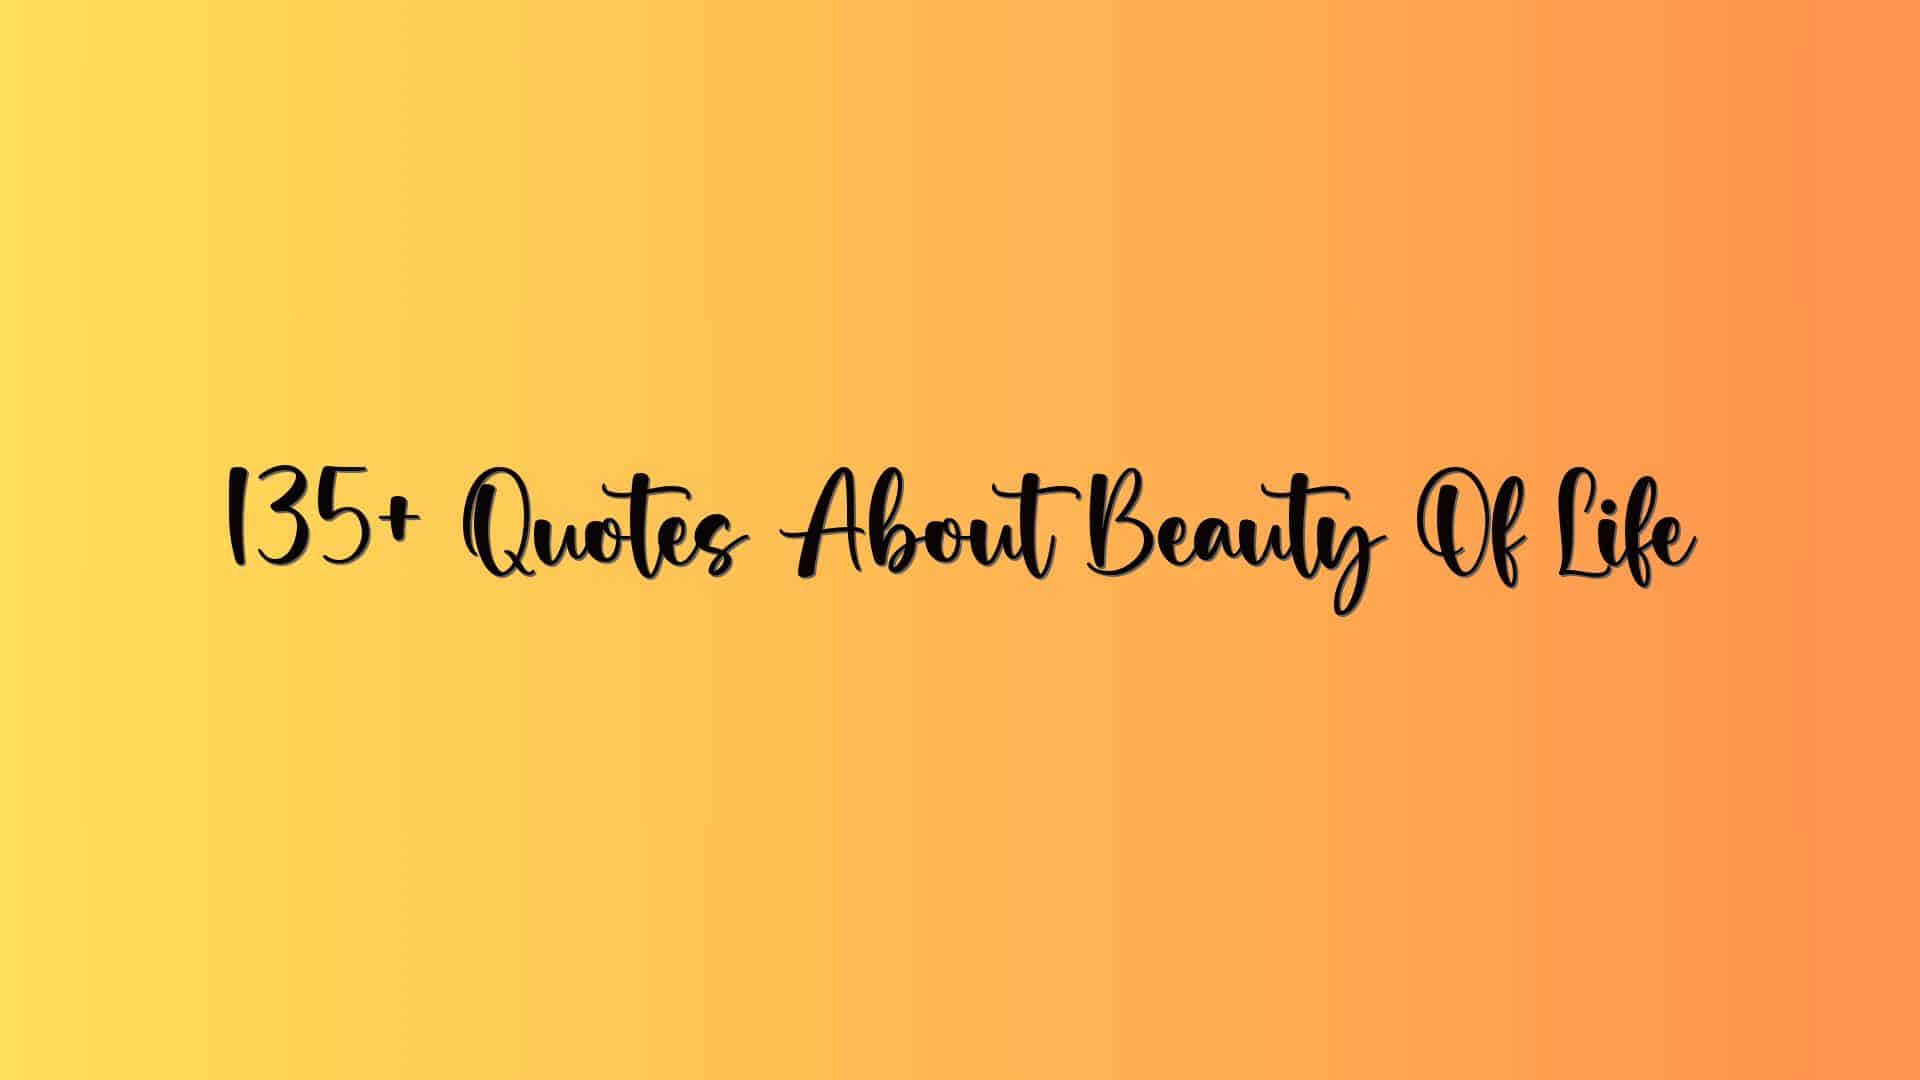 135+ Quotes About Beauty Of Life